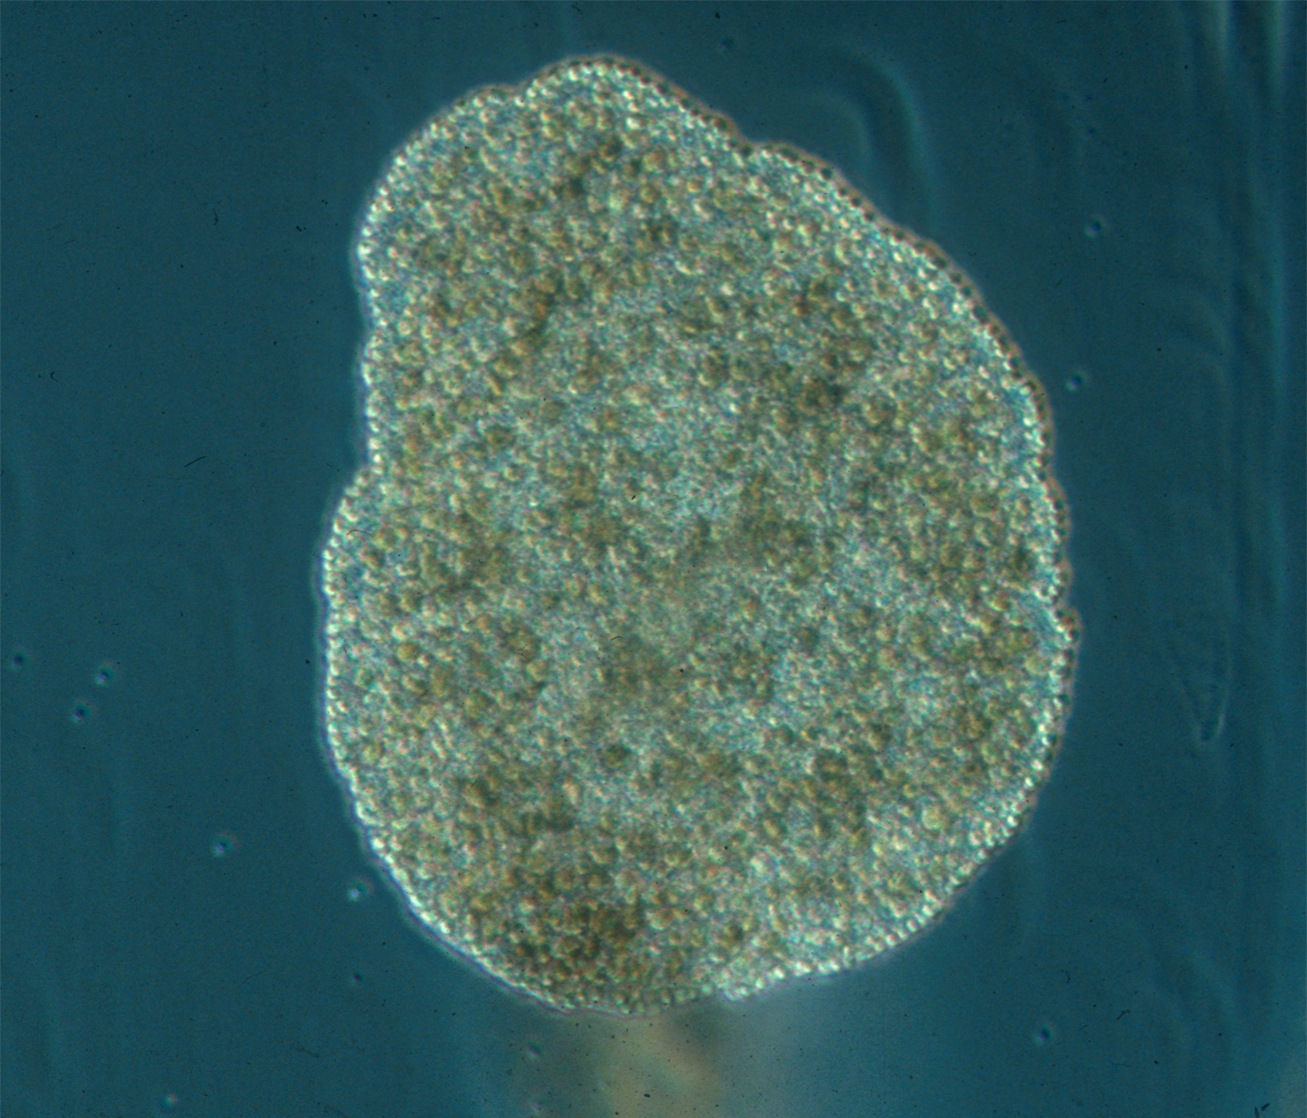 The Placozoa are a basal form of free-living (non-parasitic) multicellular organism. They are the simplest in structure of all animals. Three genera have been found: the classical Trichoplax adhaerens, Hoilungia hongkongensis, and Polyplacotoma mediterranea.